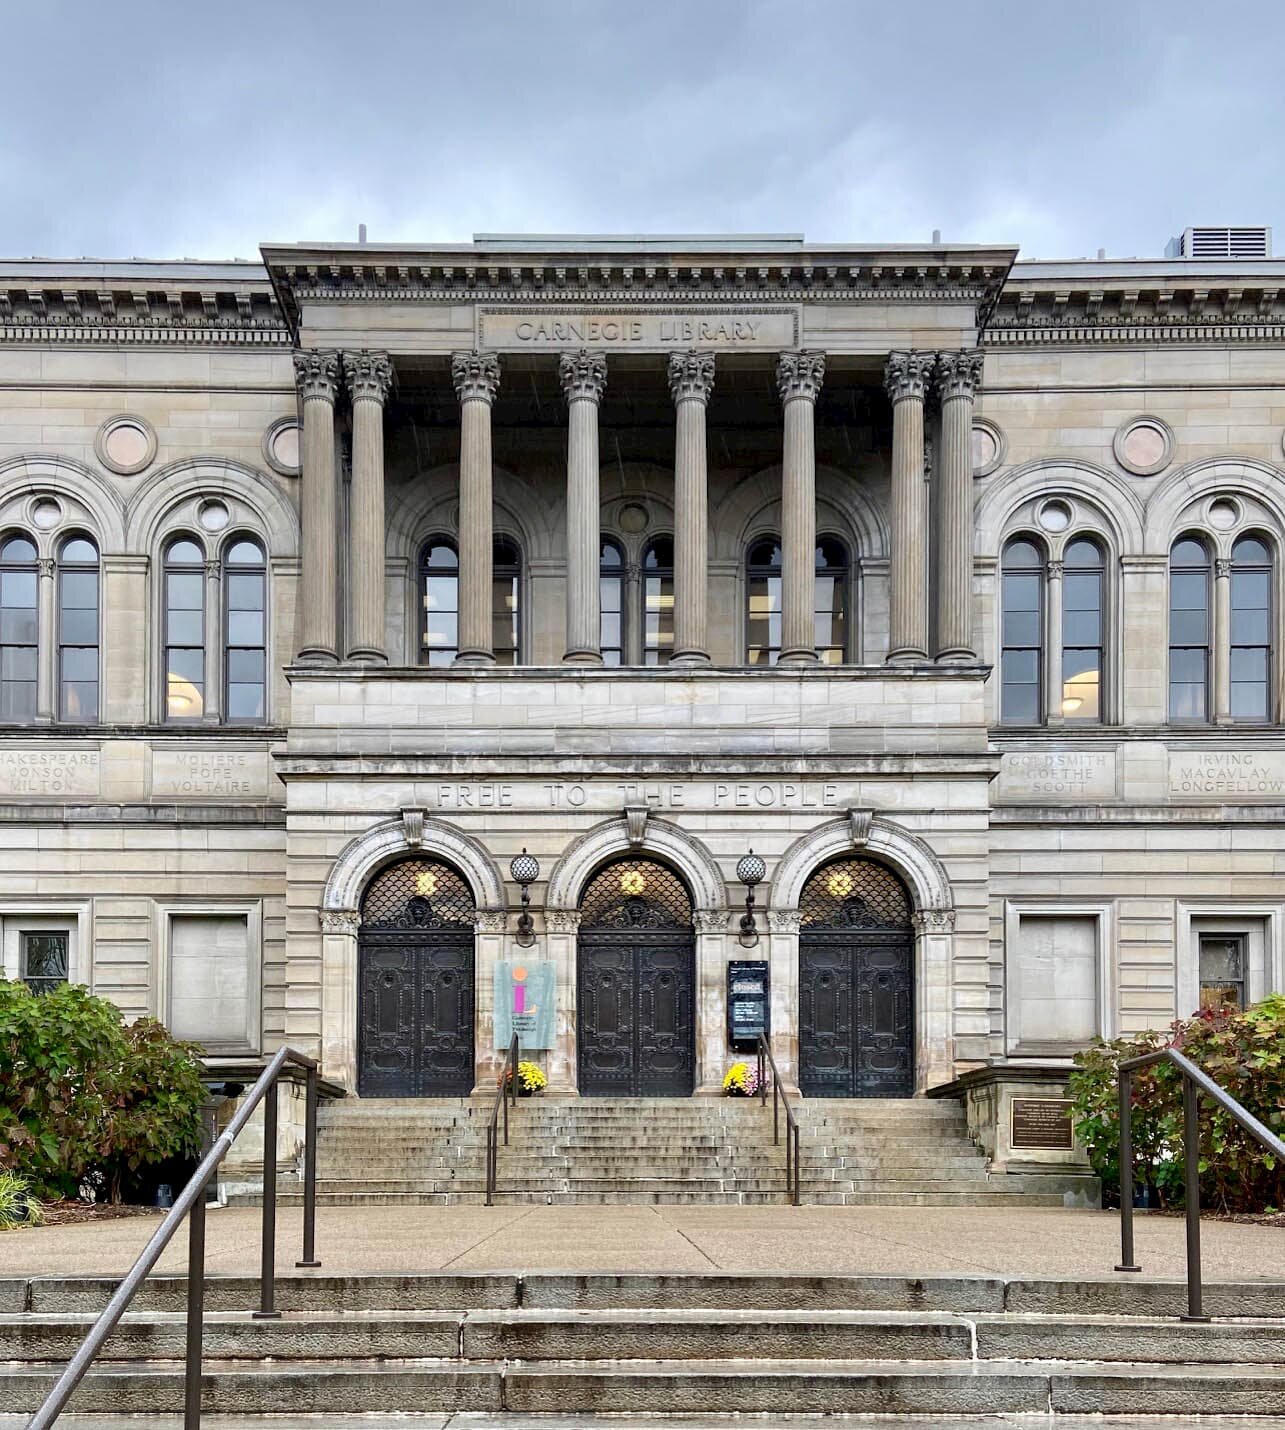  The entrance to the main Carnegie Library in Pittsburgh. The words “Free to the People” are carved into the stone above the three massive entry doors. 